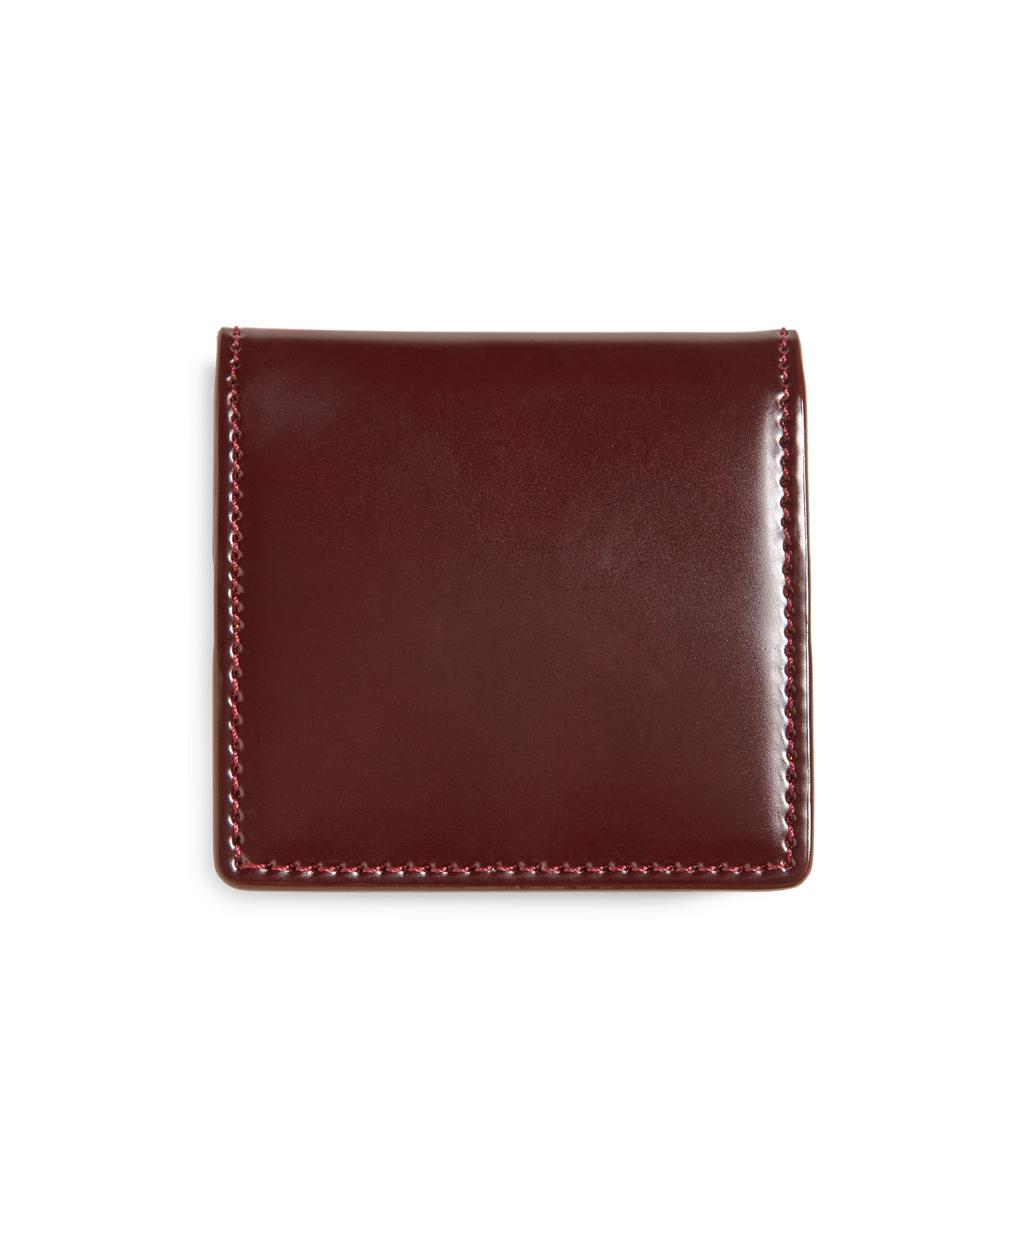 Lyst - Brooks Brothers Cordovan Coin Case in Brown for Men